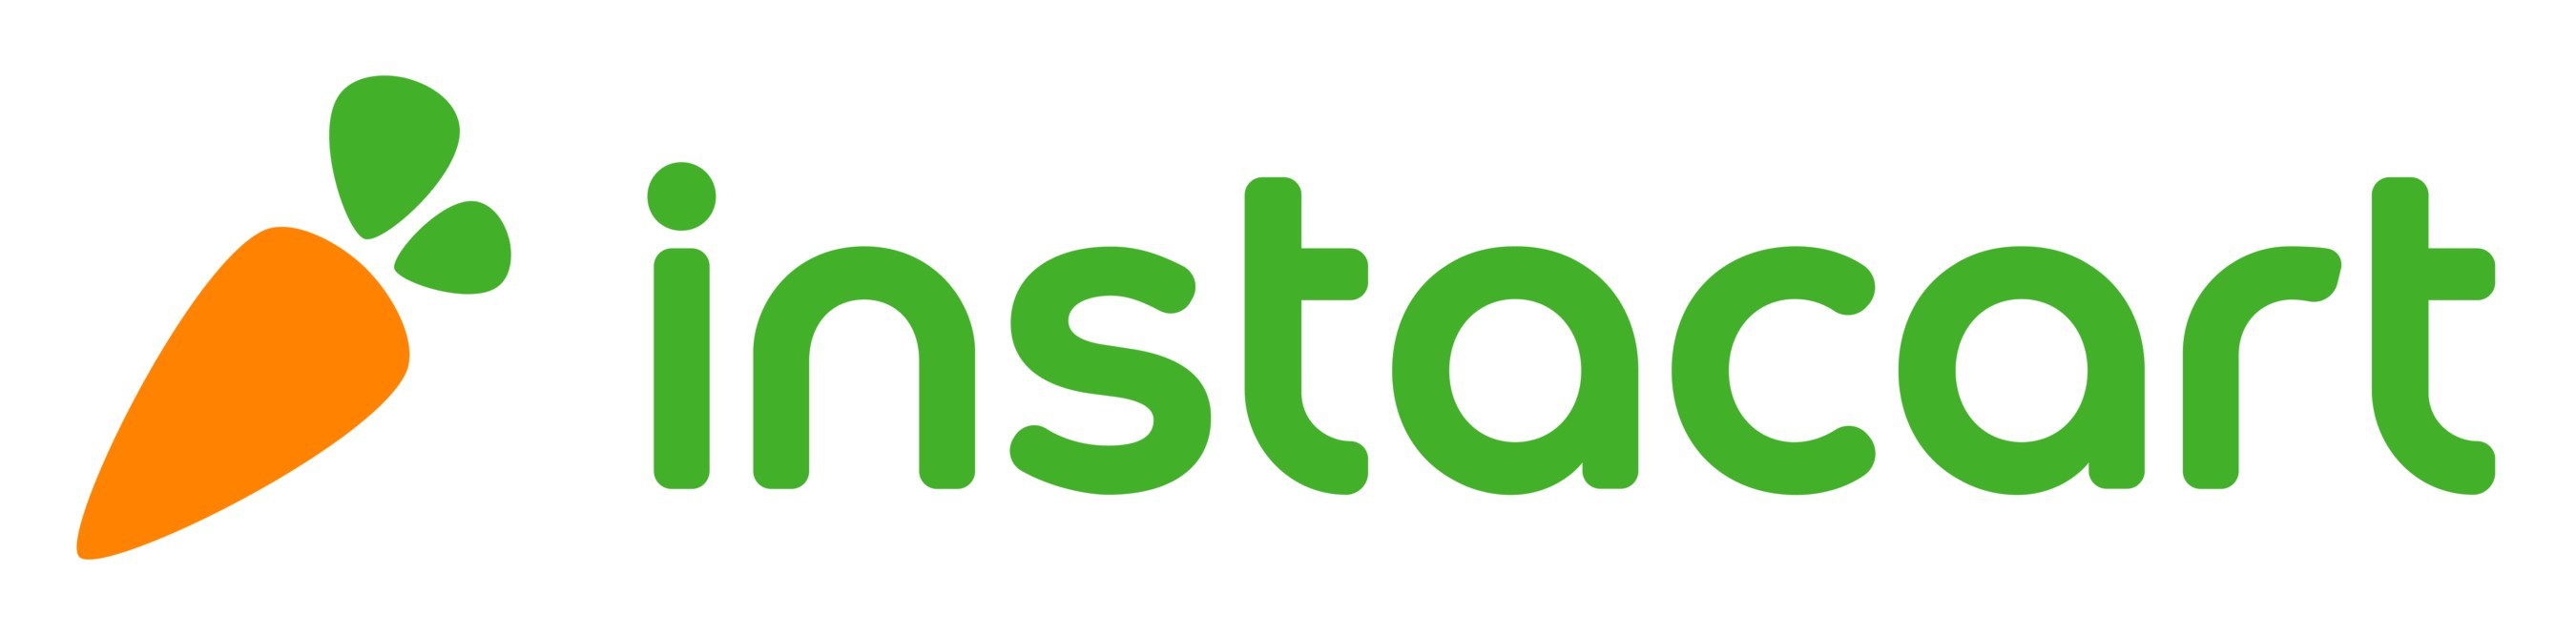 Instacart Raises $200 Million in New Funding as Grocery Delivery, Pickup Booms During Pandemic